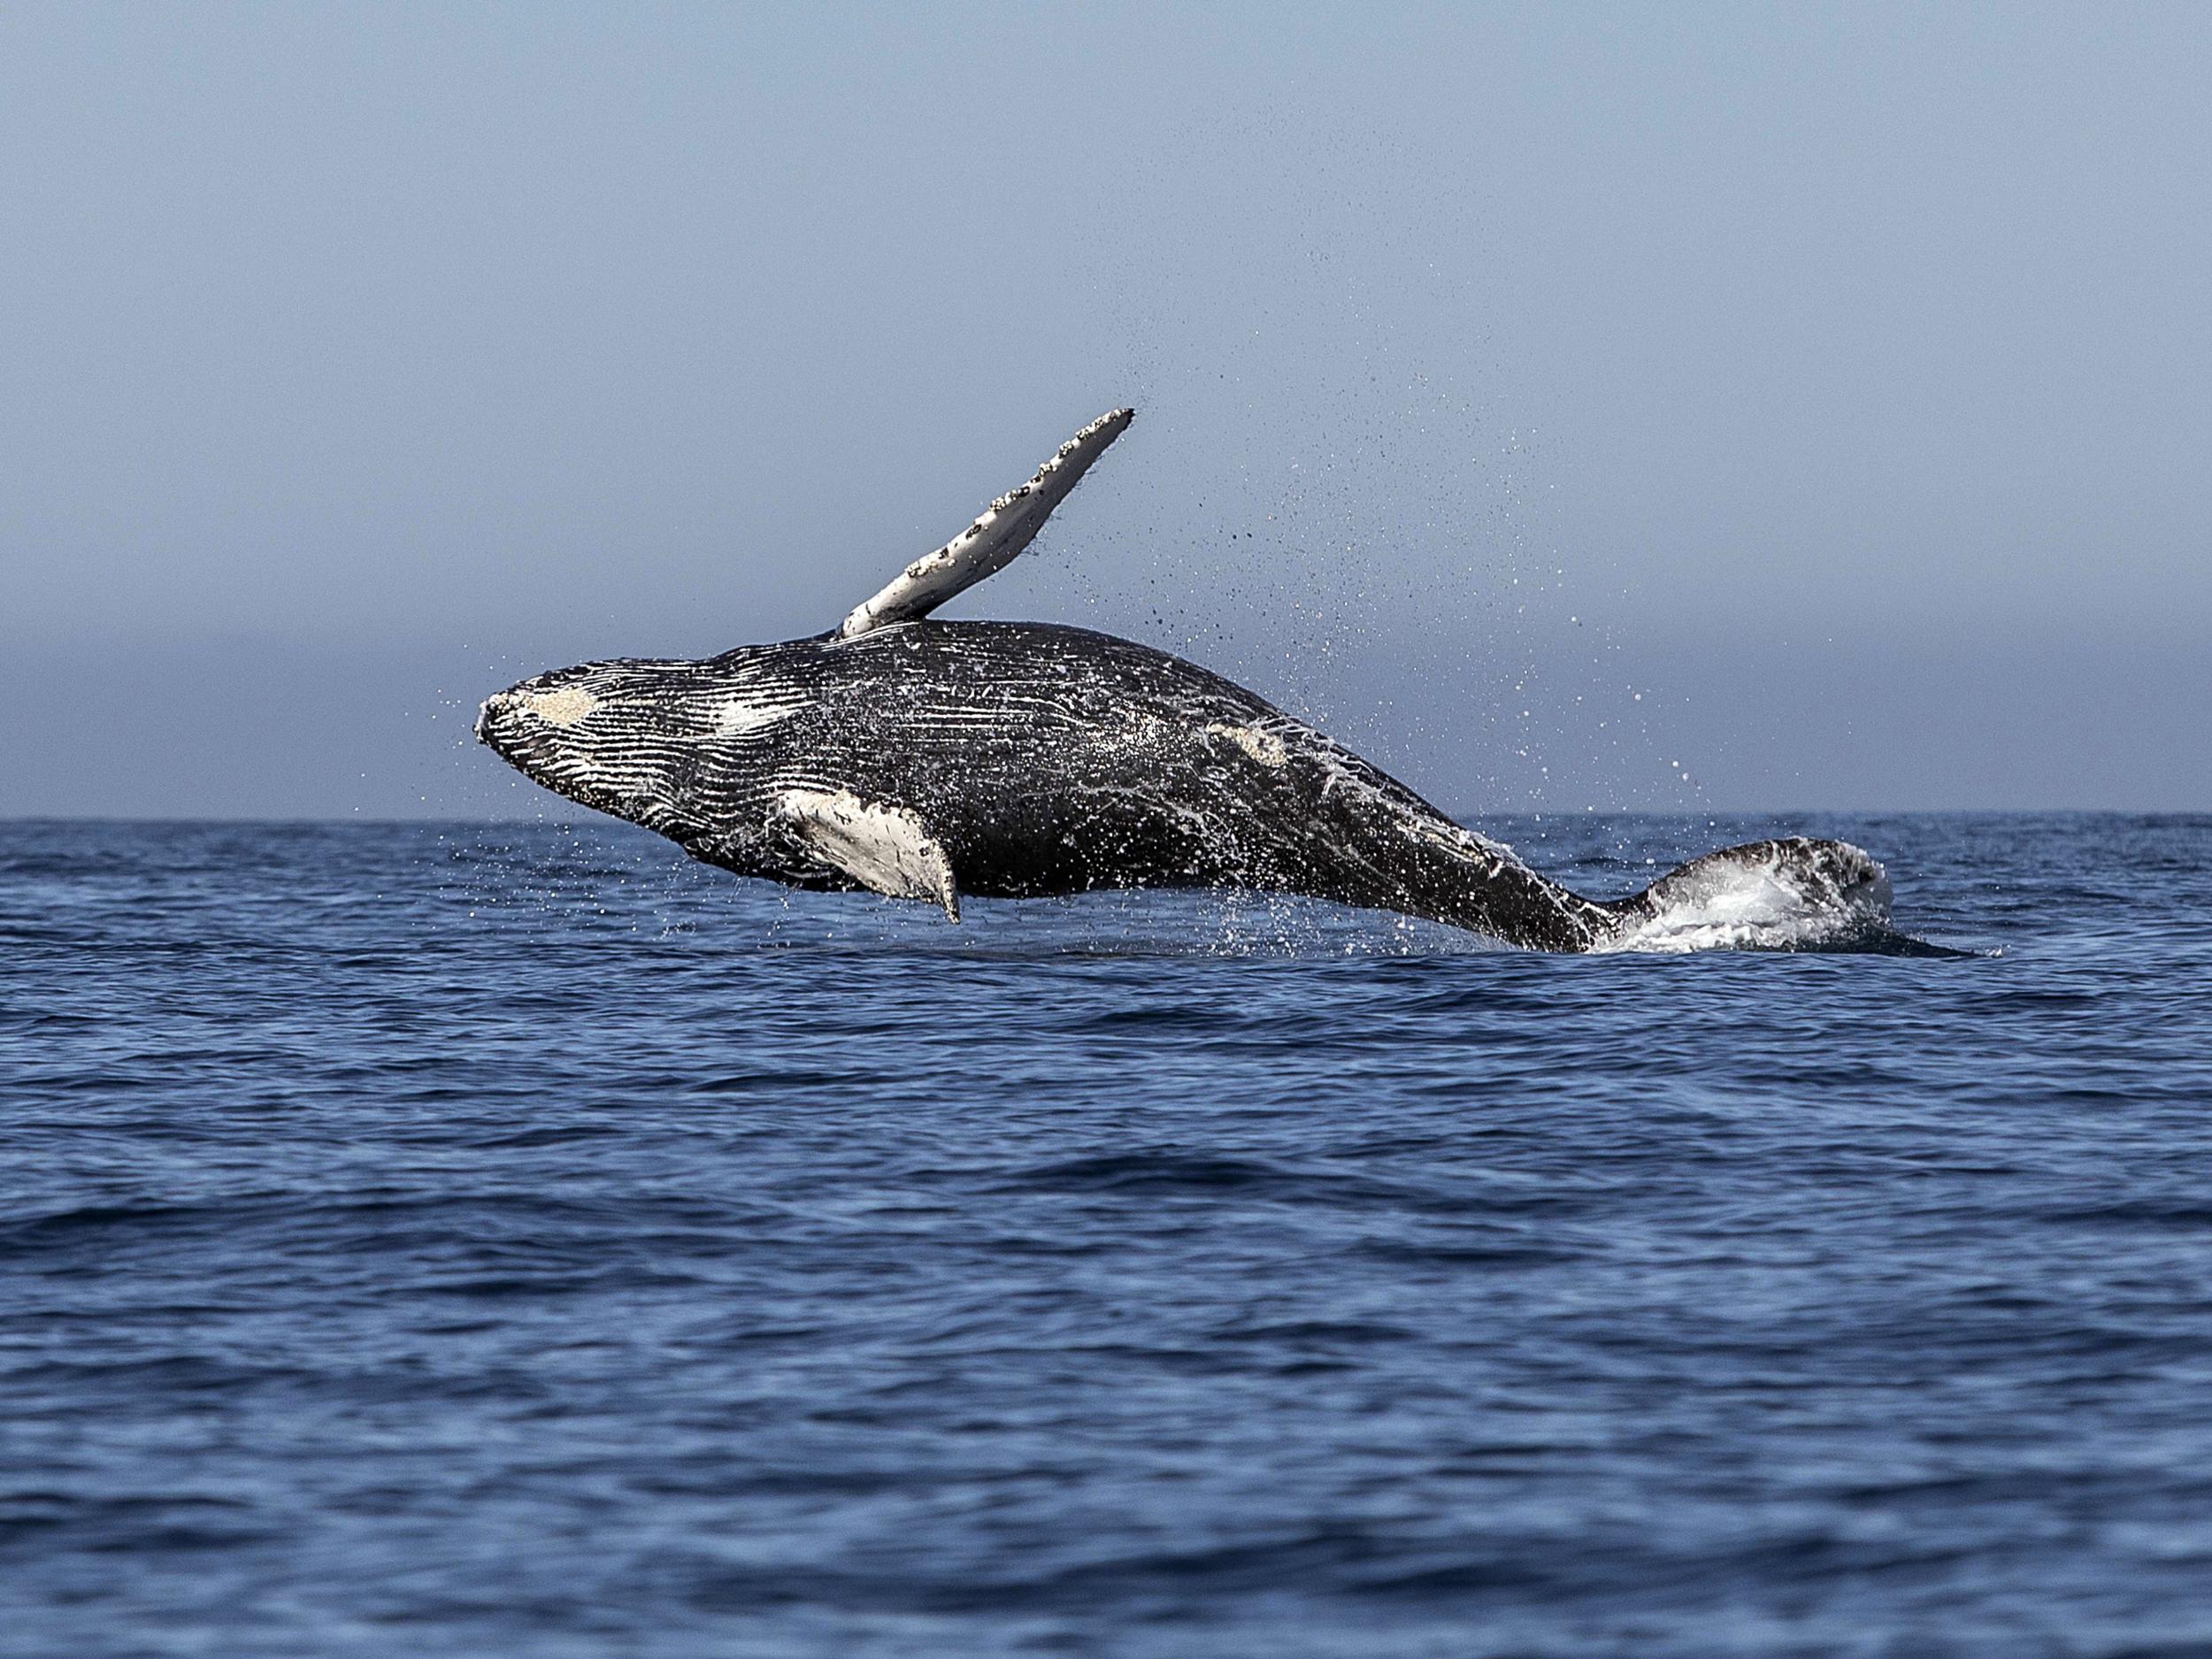 'Slower speeds can reduce underwater noise levels, and therefore may help some whale populations recover,' the open letter said